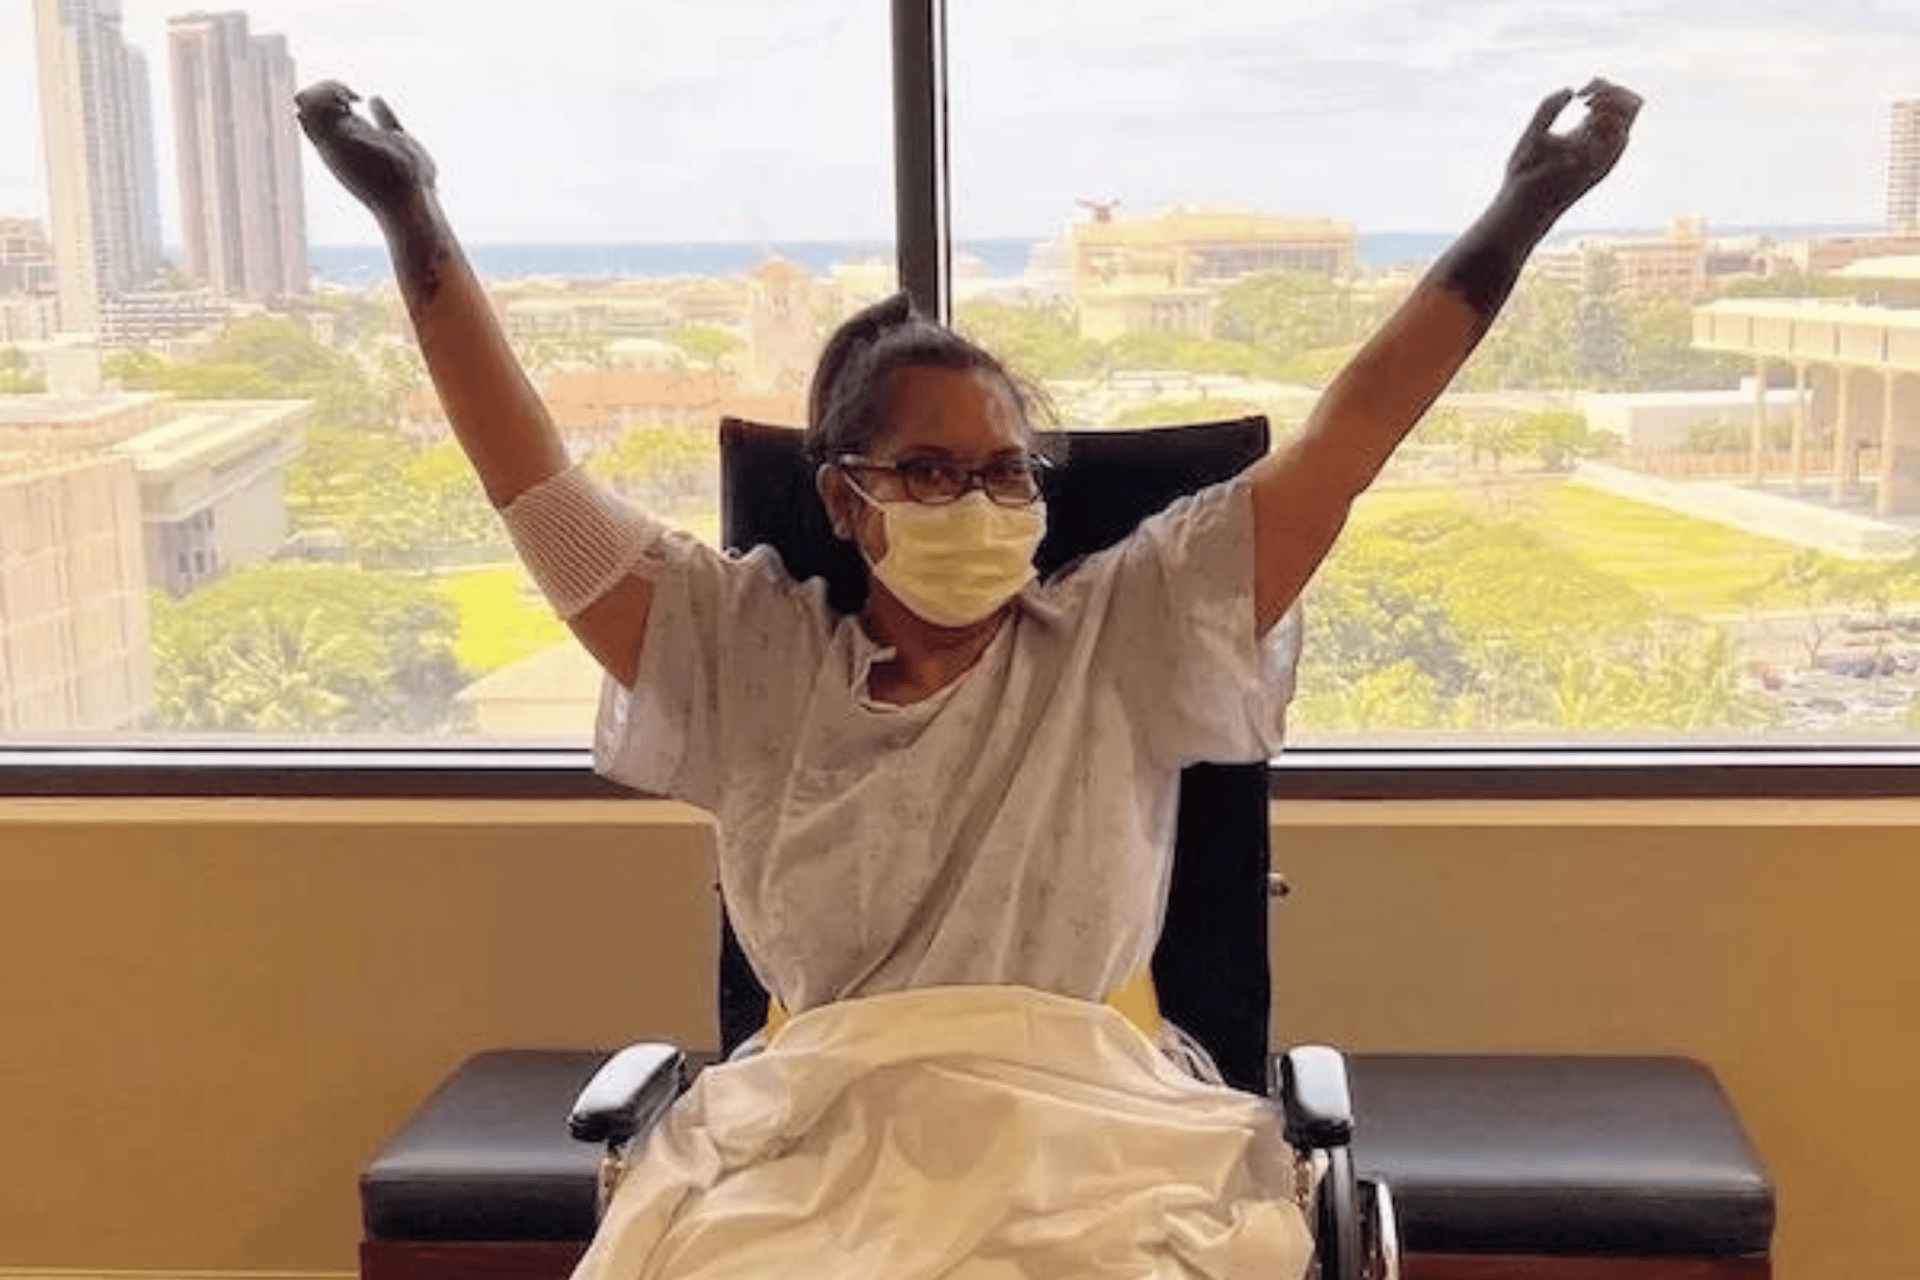 Lauren Washington after surgery wearing a mask with her hands held up